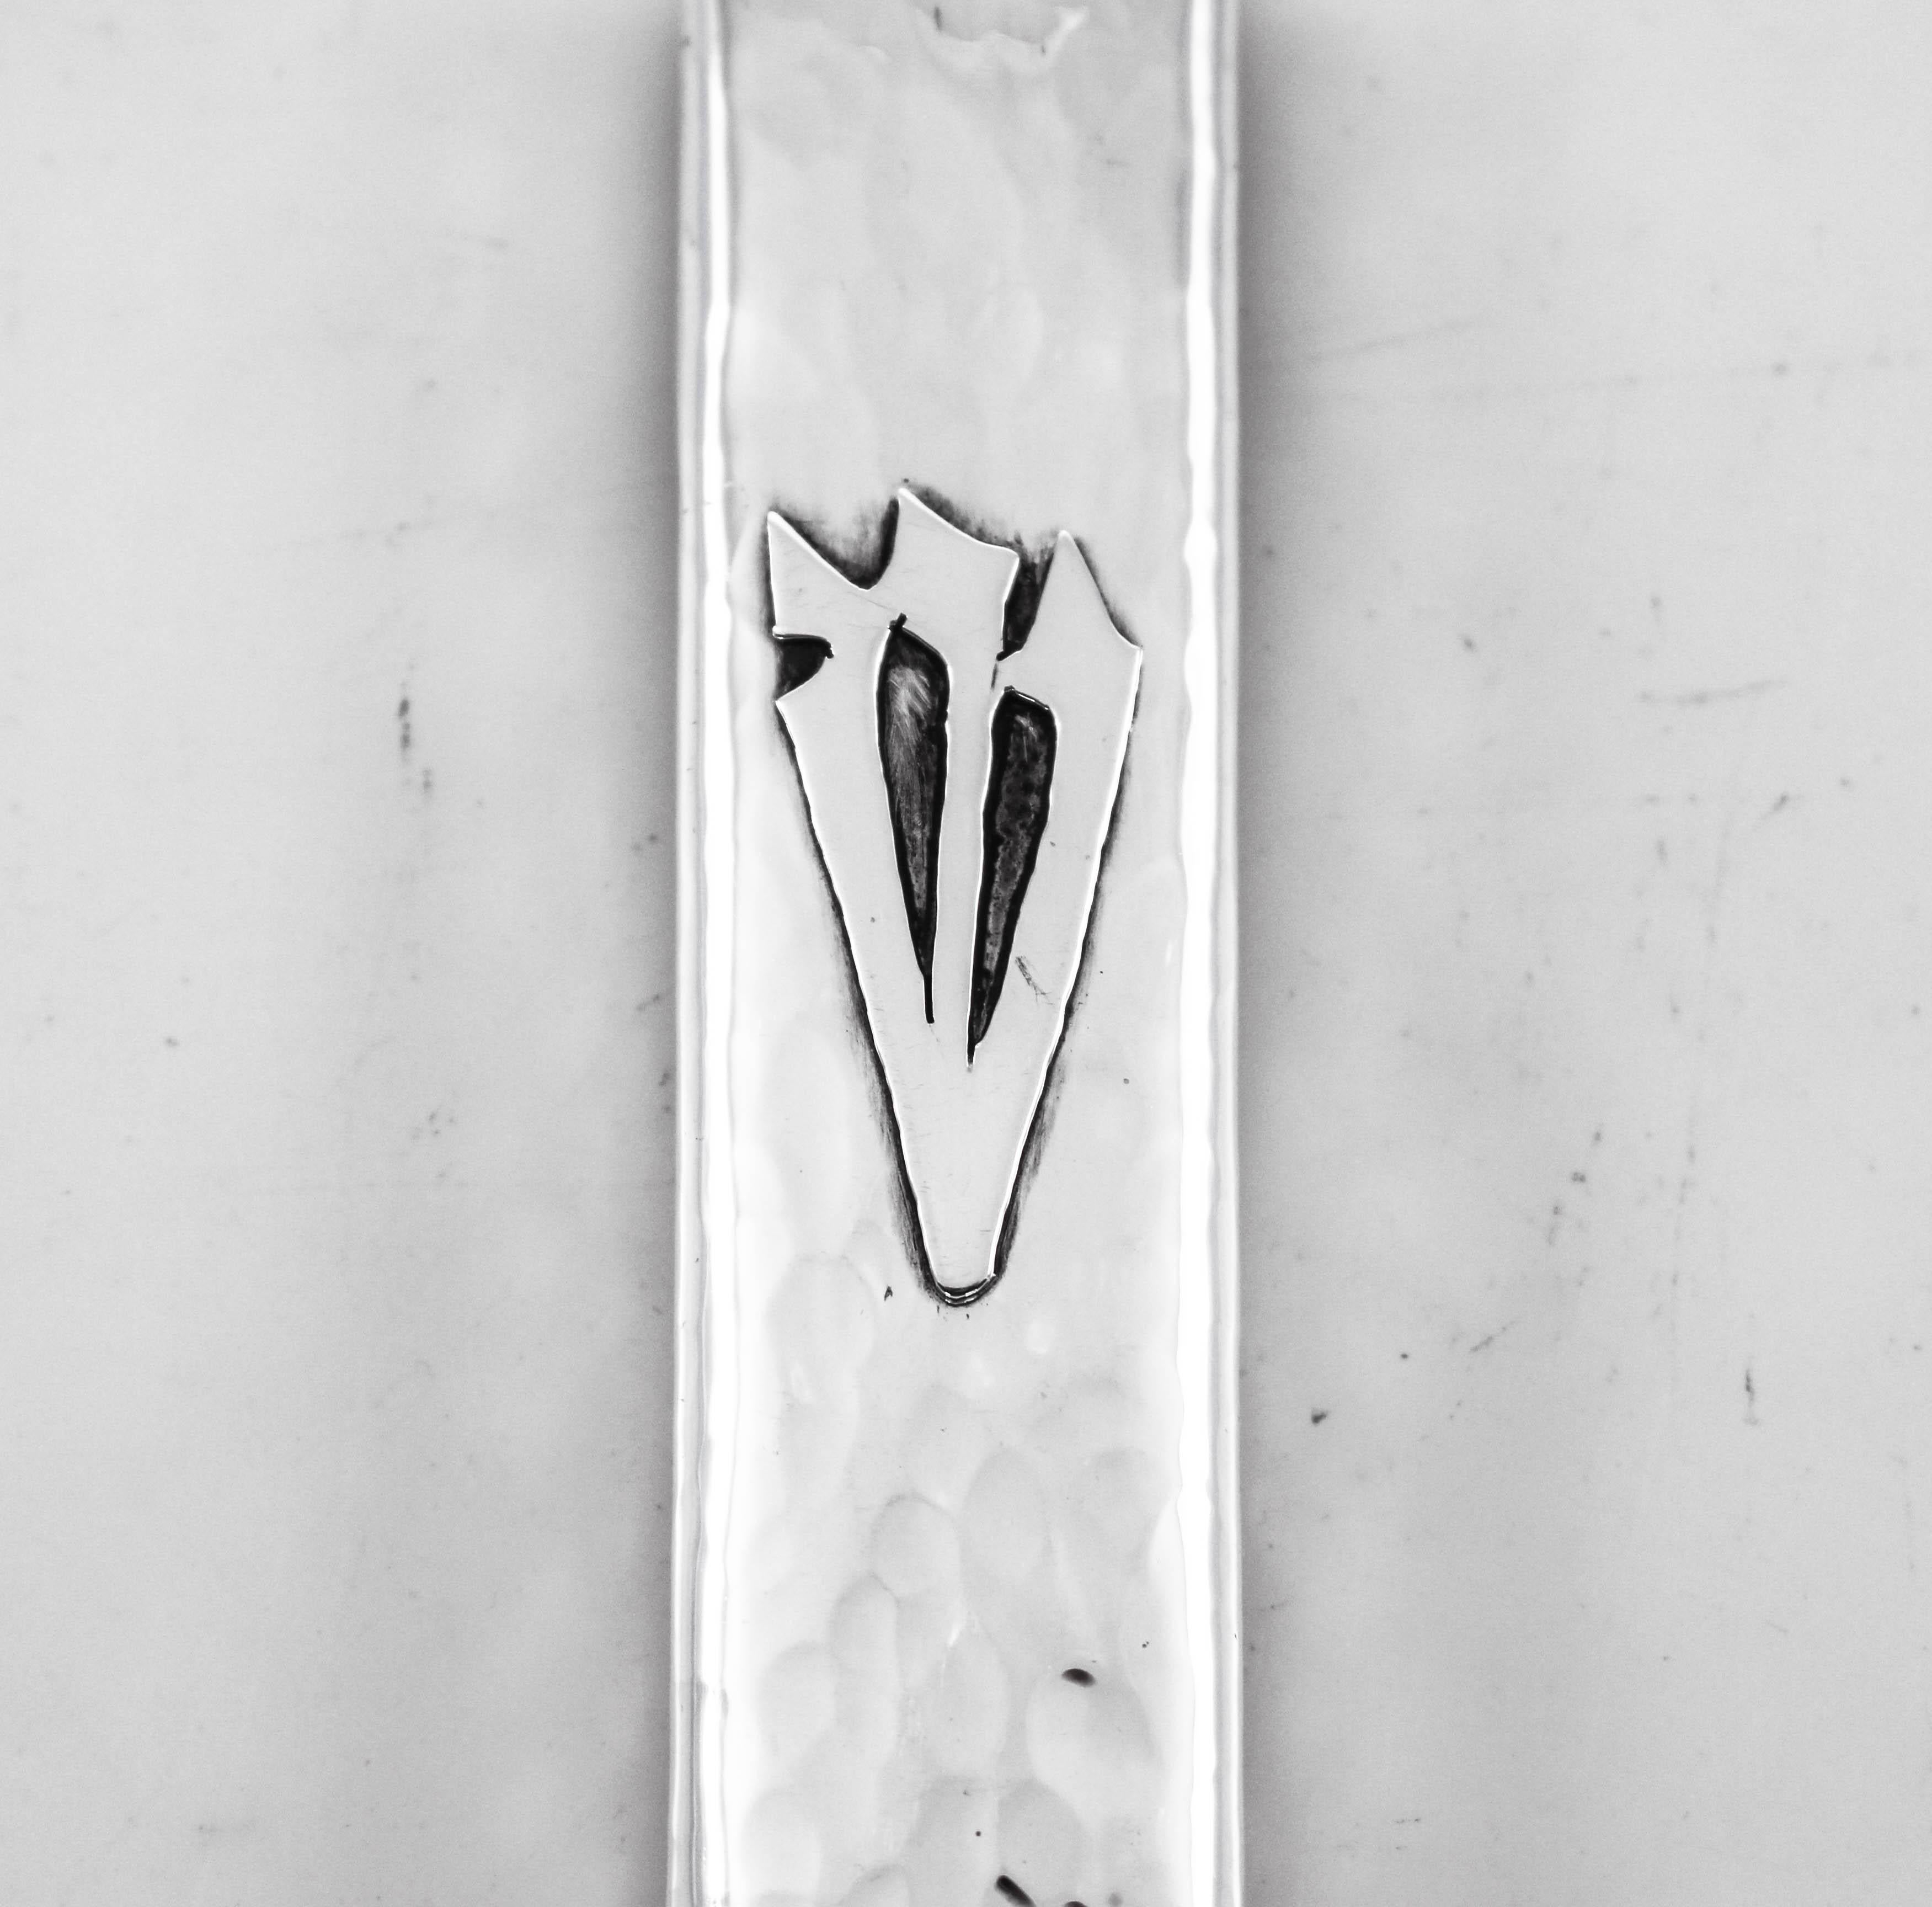 We are proud to offer this sterling silver mezuzah case. A mezuzah is a piece of parchment contained in a decorative case and inscribed with specific Hebrew verses from the Torah. These verses consist of the Jewish prayer Shema Yisrael, beginning